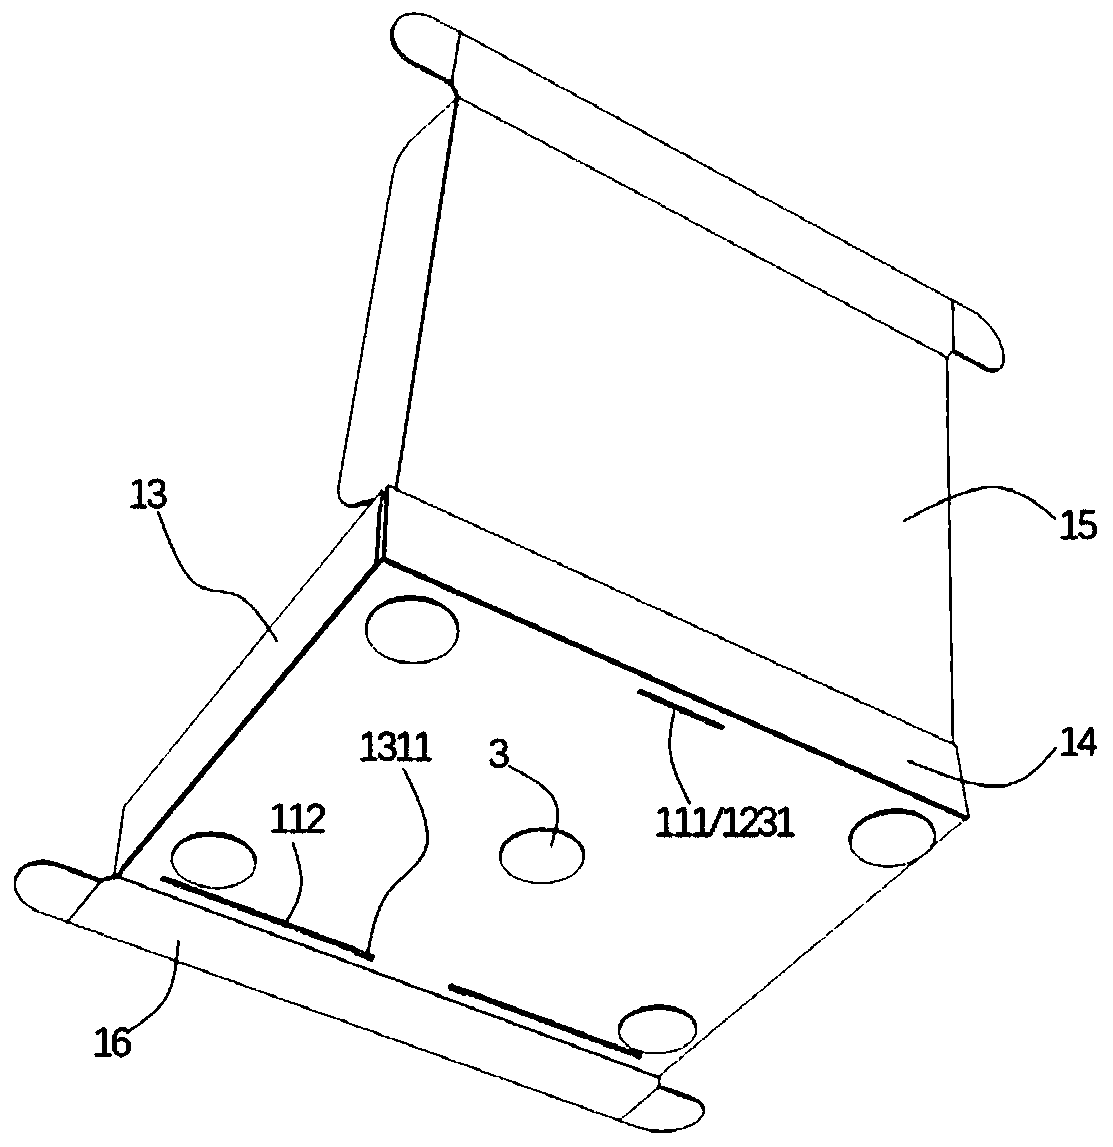 Integrated on-table easel capable of carrying drawing tools